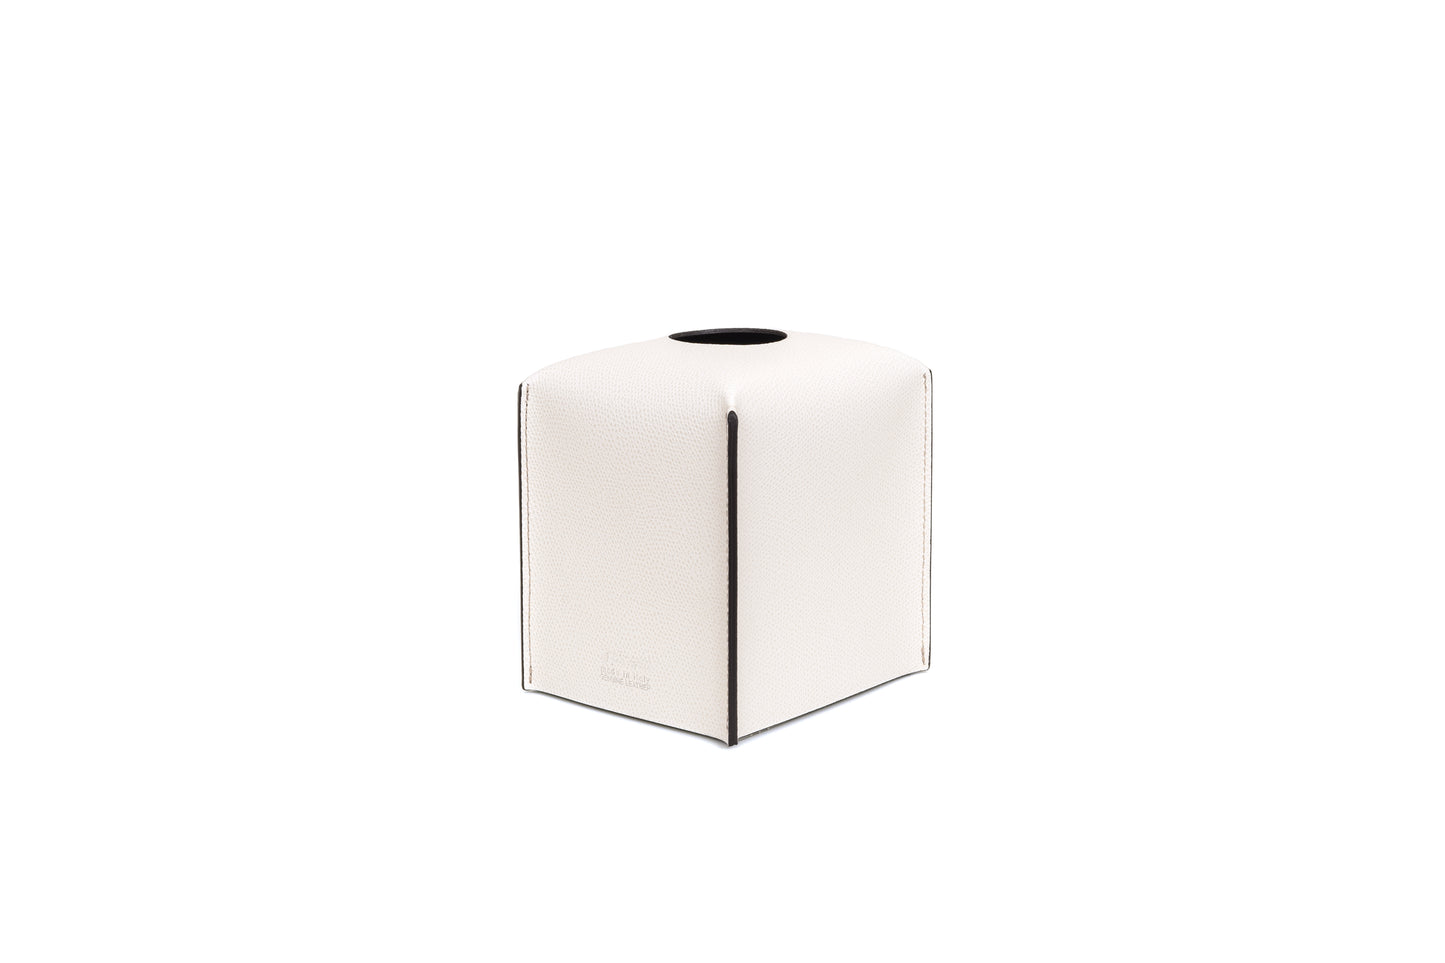 Pinetti Leather Tissue Holder Box | Stylish and Functional Design | Perfect for Home or Office Use | Explore a Range of Luxury Home Accessories at 2Jour Concierge, #1 luxury high-end gift & lifestyle shop